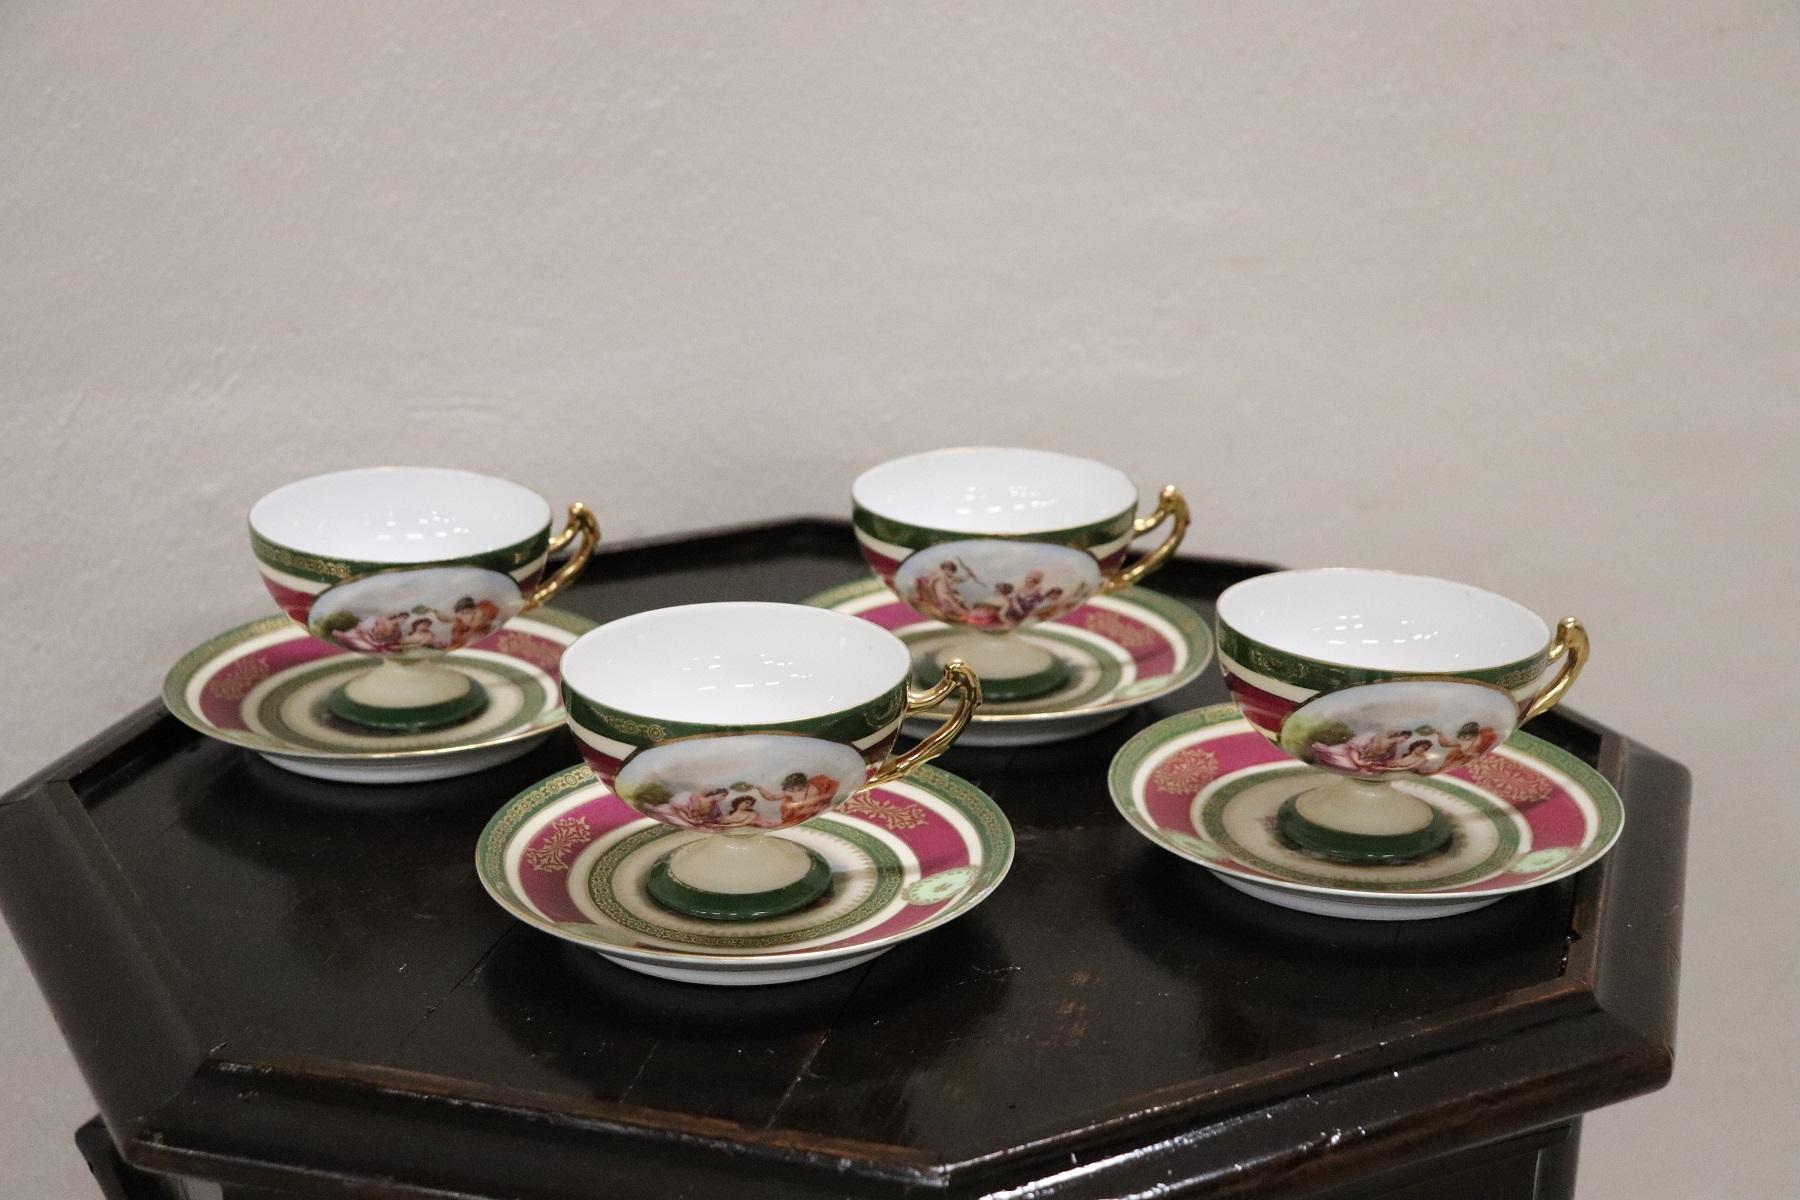 Beautiful fine porcelain tea and coffee set 8 pieces signed Royal Epiag, Czechoslovakia, 1930s. The service is complete to serve four people at the table includes: four cups with plates underneath. Refined hand painted decoration of Classic taste